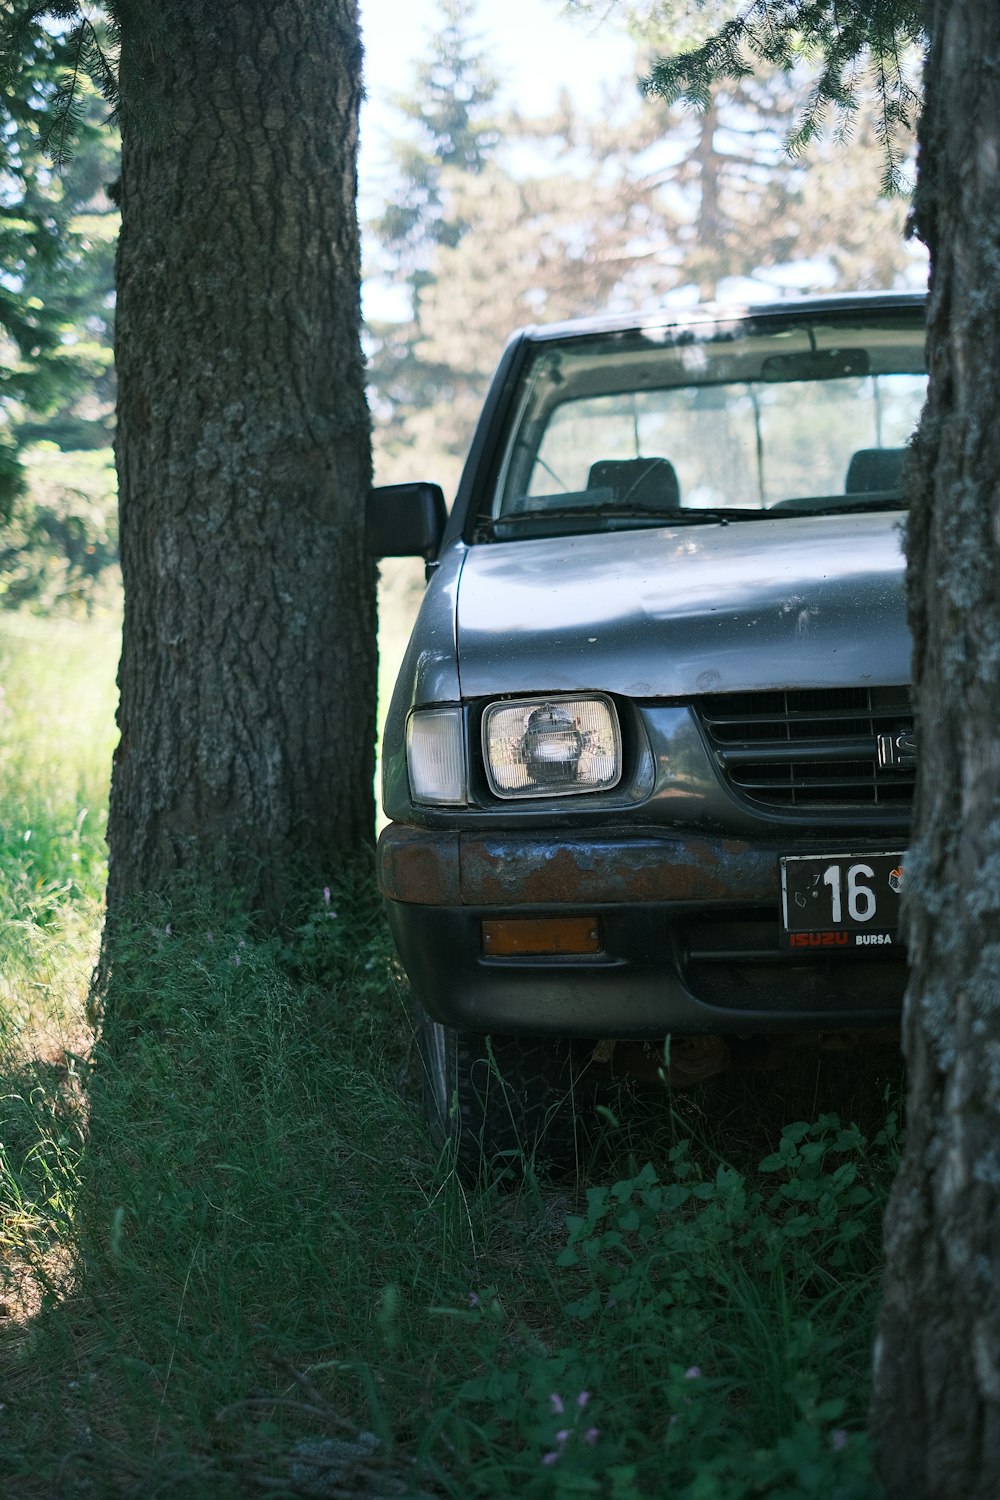 a car parked in the woods behind some trees